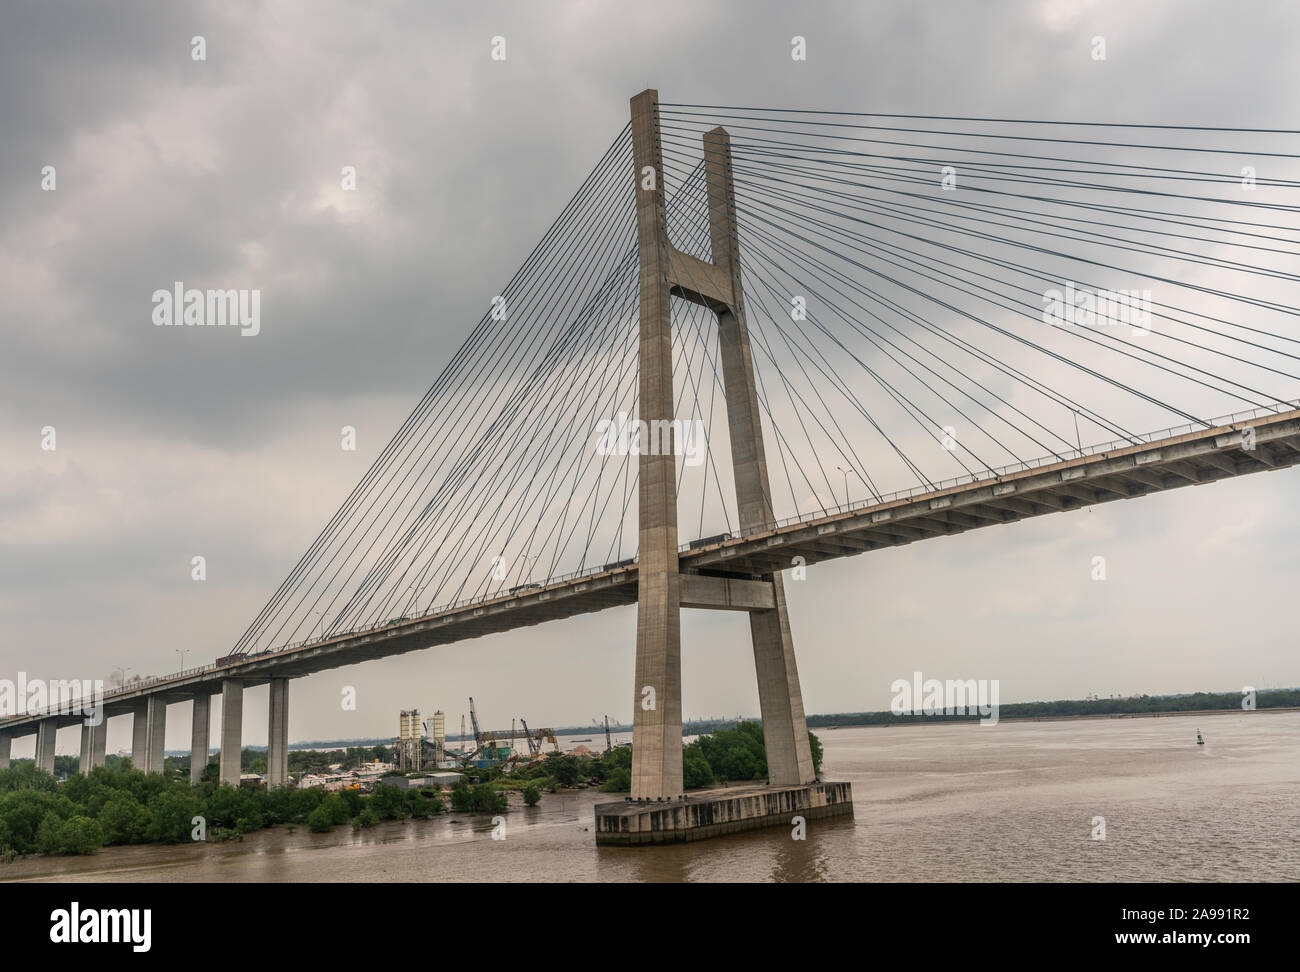 Ho Chi Minh City, Vietnam - March 12, 2019: Long Tau and song Sai Gon rivers meeting point. Landscape with  H-shaped pylon of Phu My suspension bridge Stock Photo